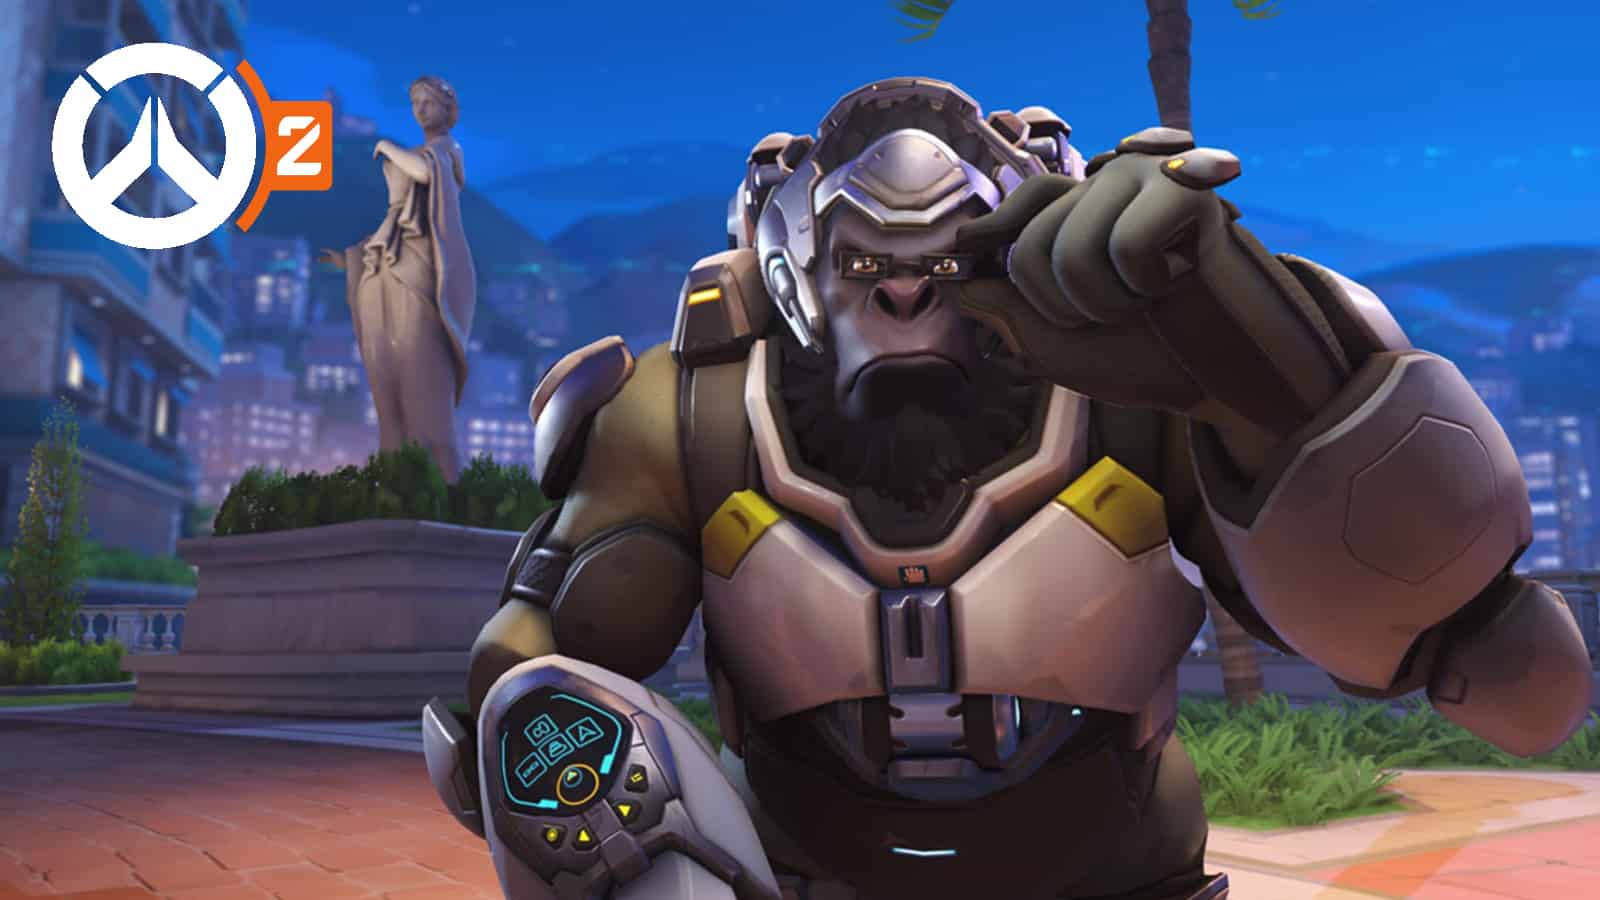 New Overwatch 2 leak is bad news as players hope for 2022 release date